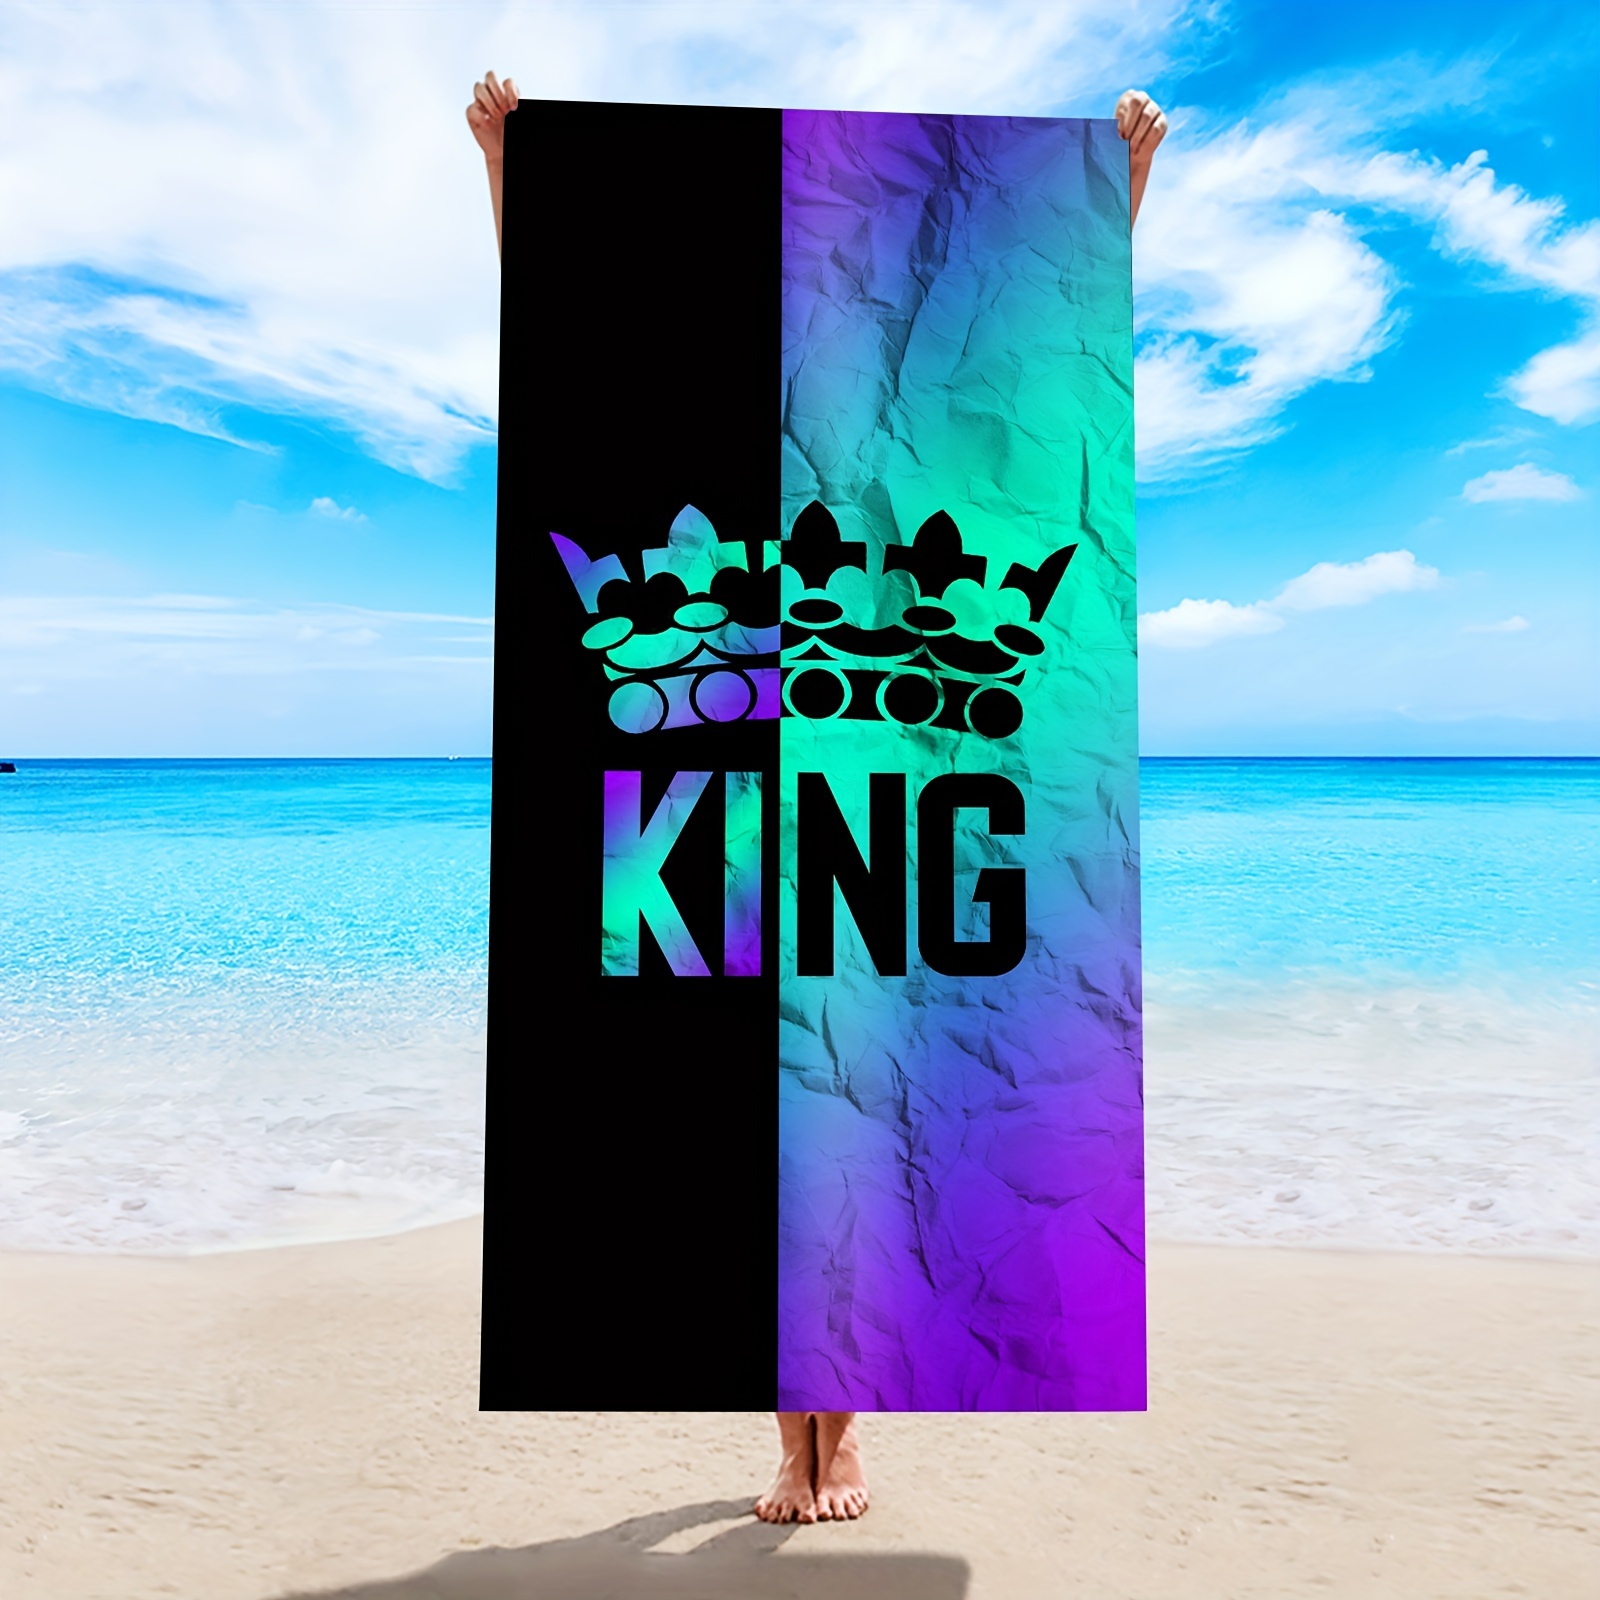 

1pc King Black & Purple Patchwork Beach Towel, Absorbent Sandproof Swimming Towel, Quick Drying Soft Pool Towel, Perfect For Camping Travel Spa Sports, Beach Essentials, Travel Supplies